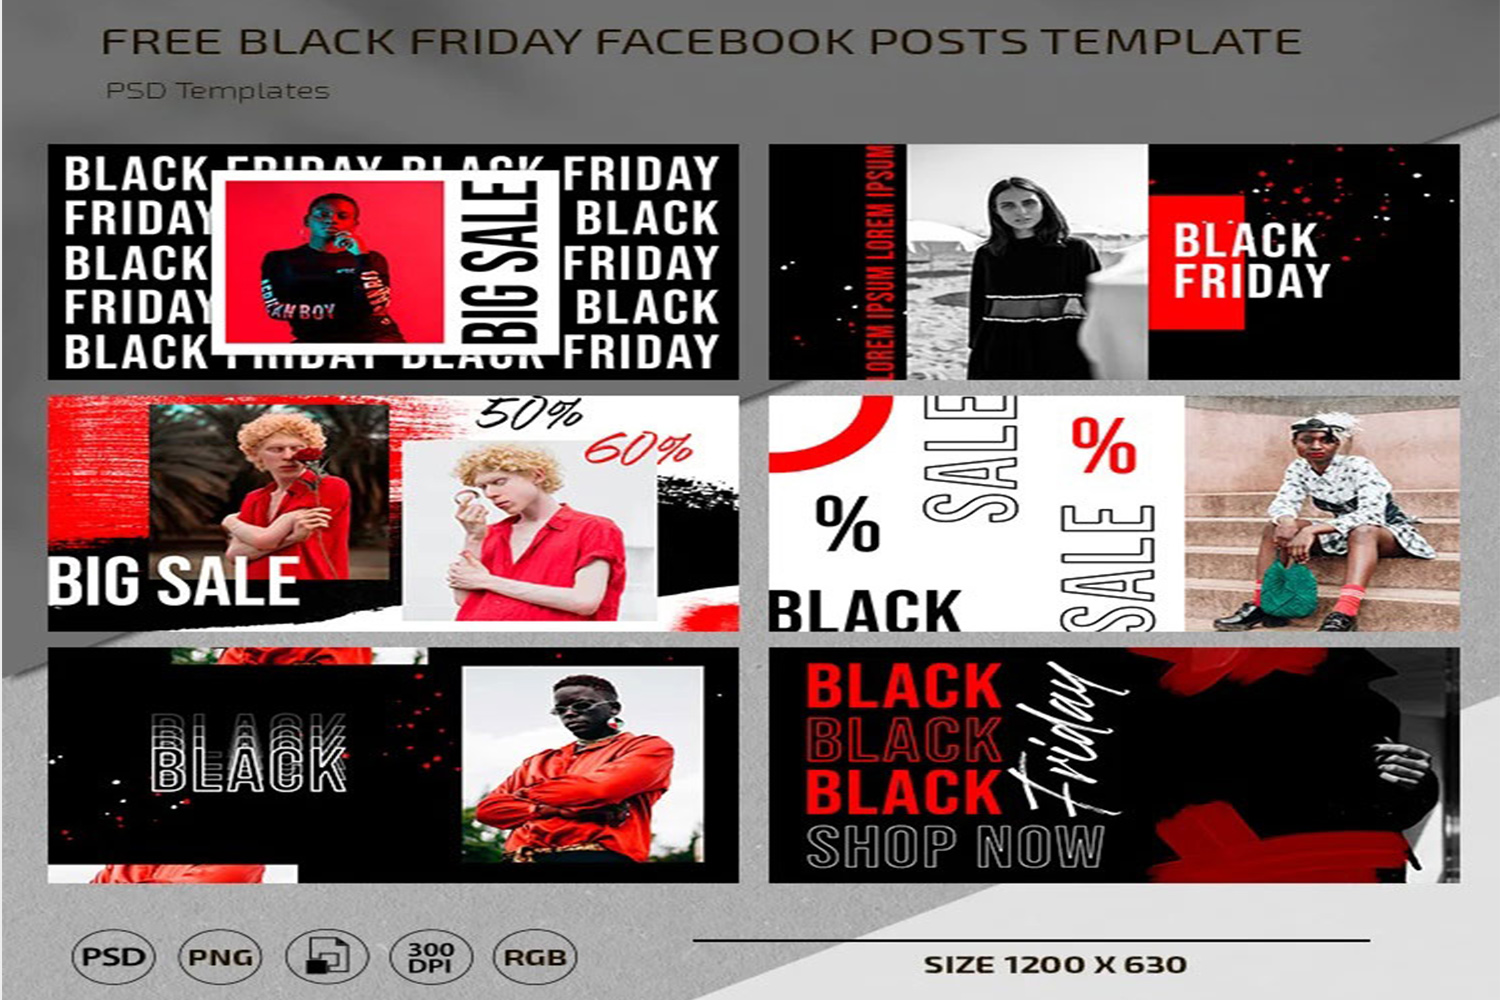 Black Friday Facebook Posts Template PSD Free Download